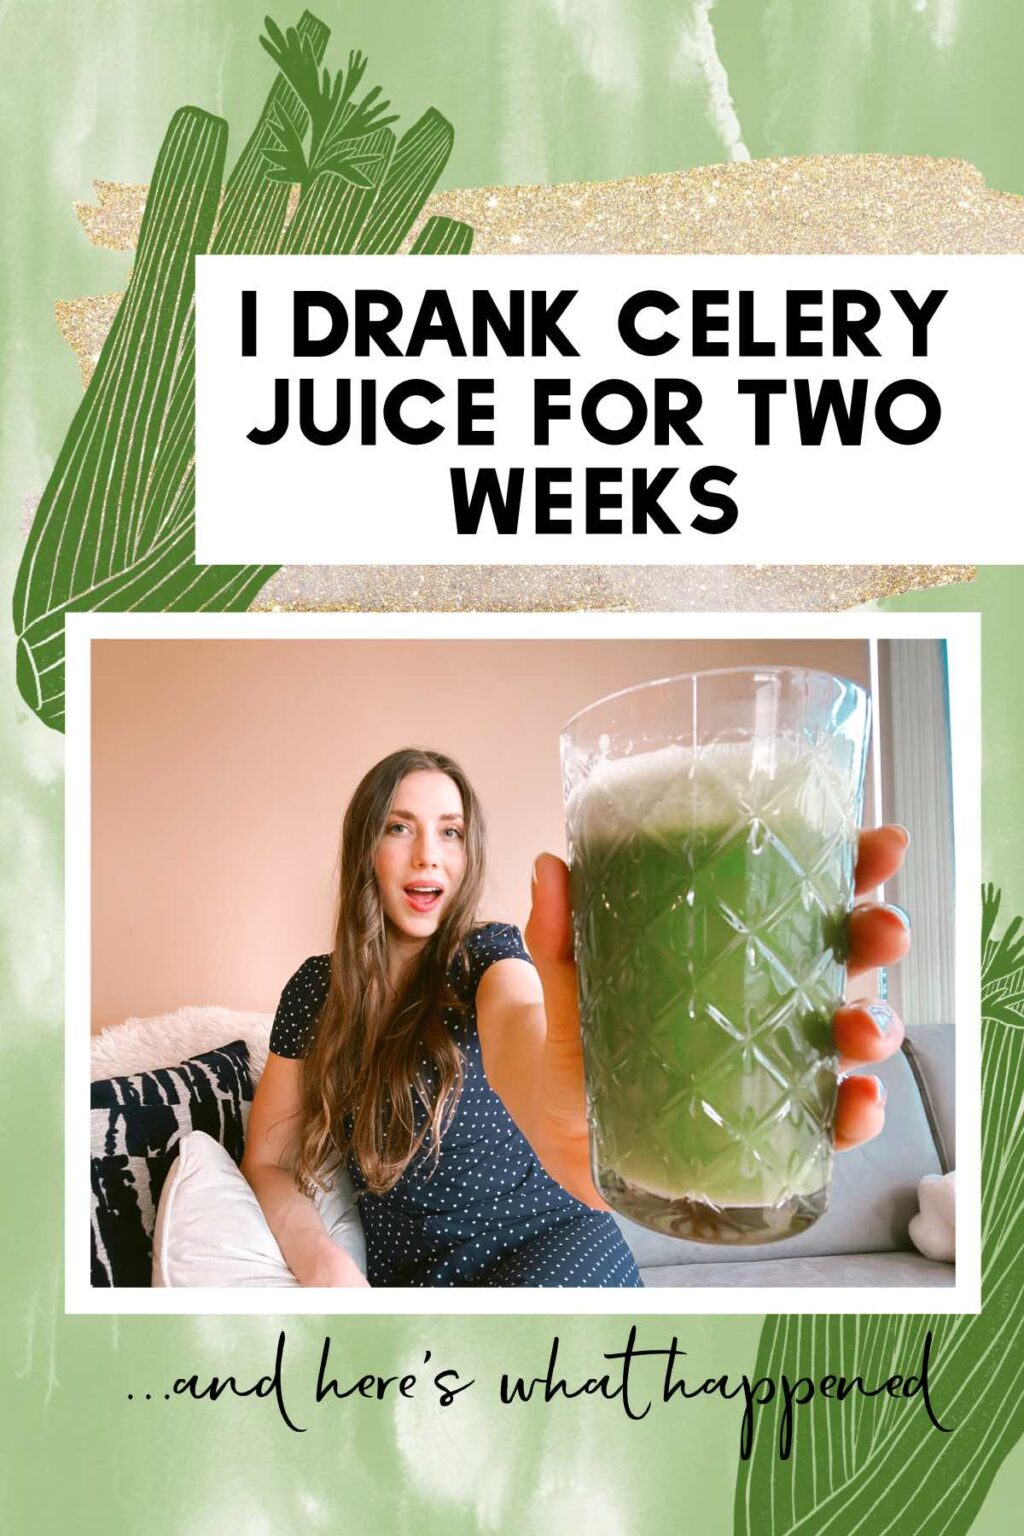 I drank celery juice for 2 weeks and here’s what happened